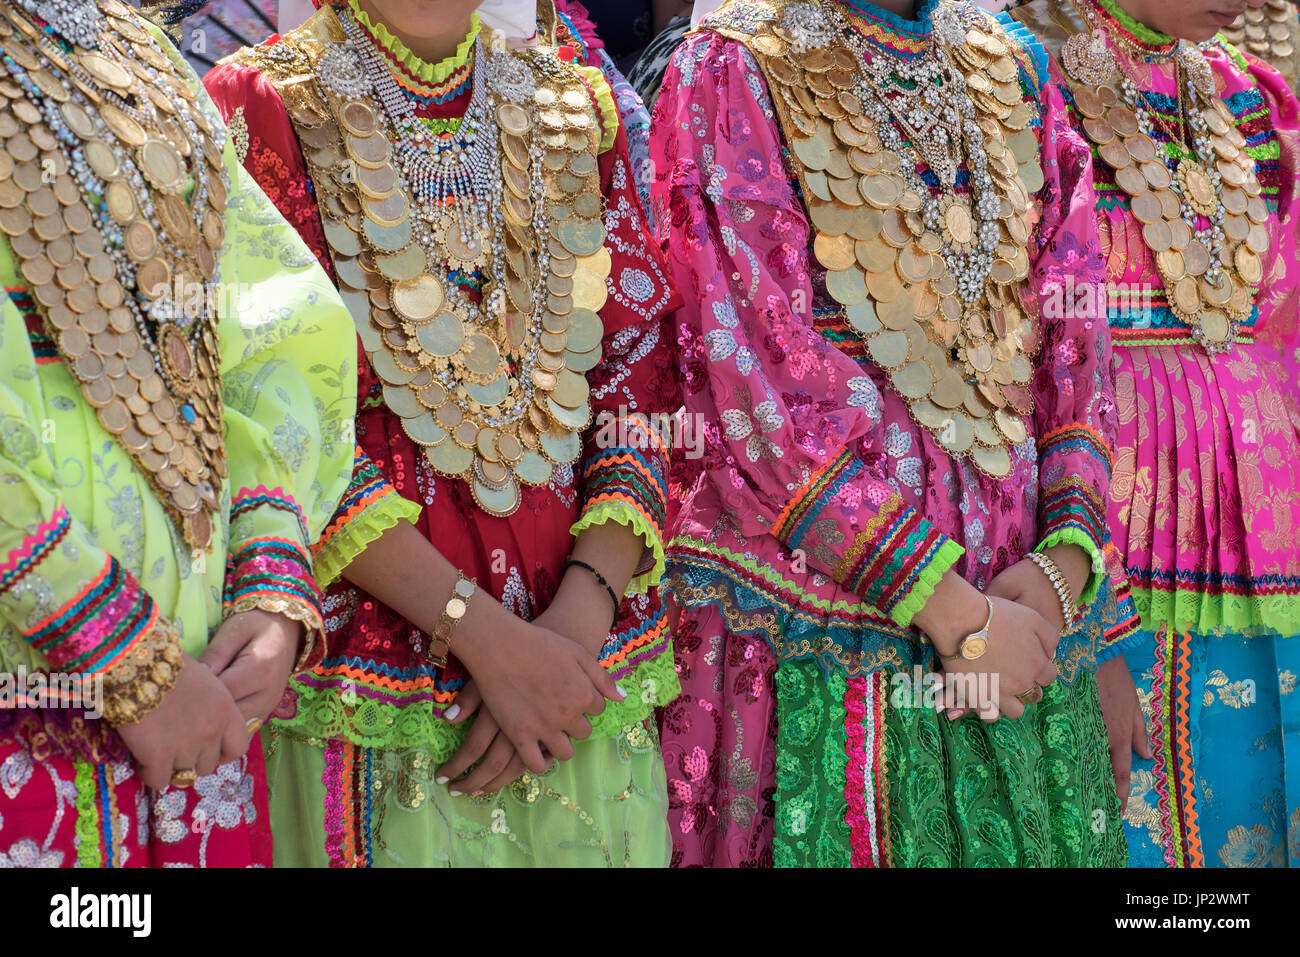 Dressed girls with gold coin necklaces, Assumption Day, Olympos, Karpathos Greece Stock Photo